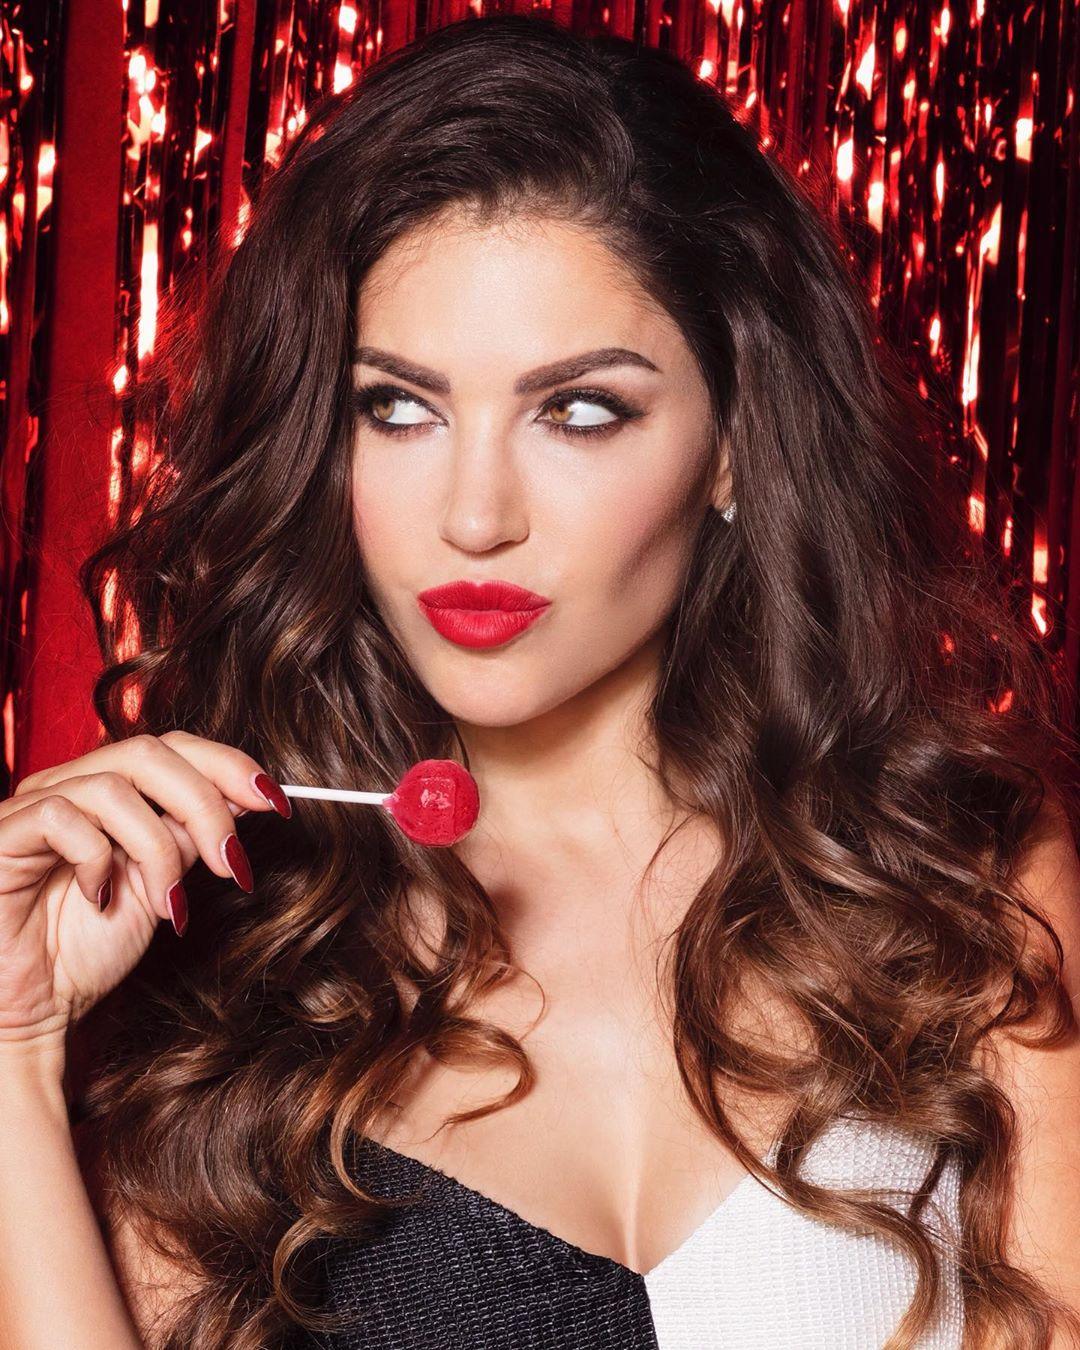 61 Sexy Yolanthe Cabau van Kasbergen Boobs Pictures Which Will Leave You Amazed And Bewildered 22